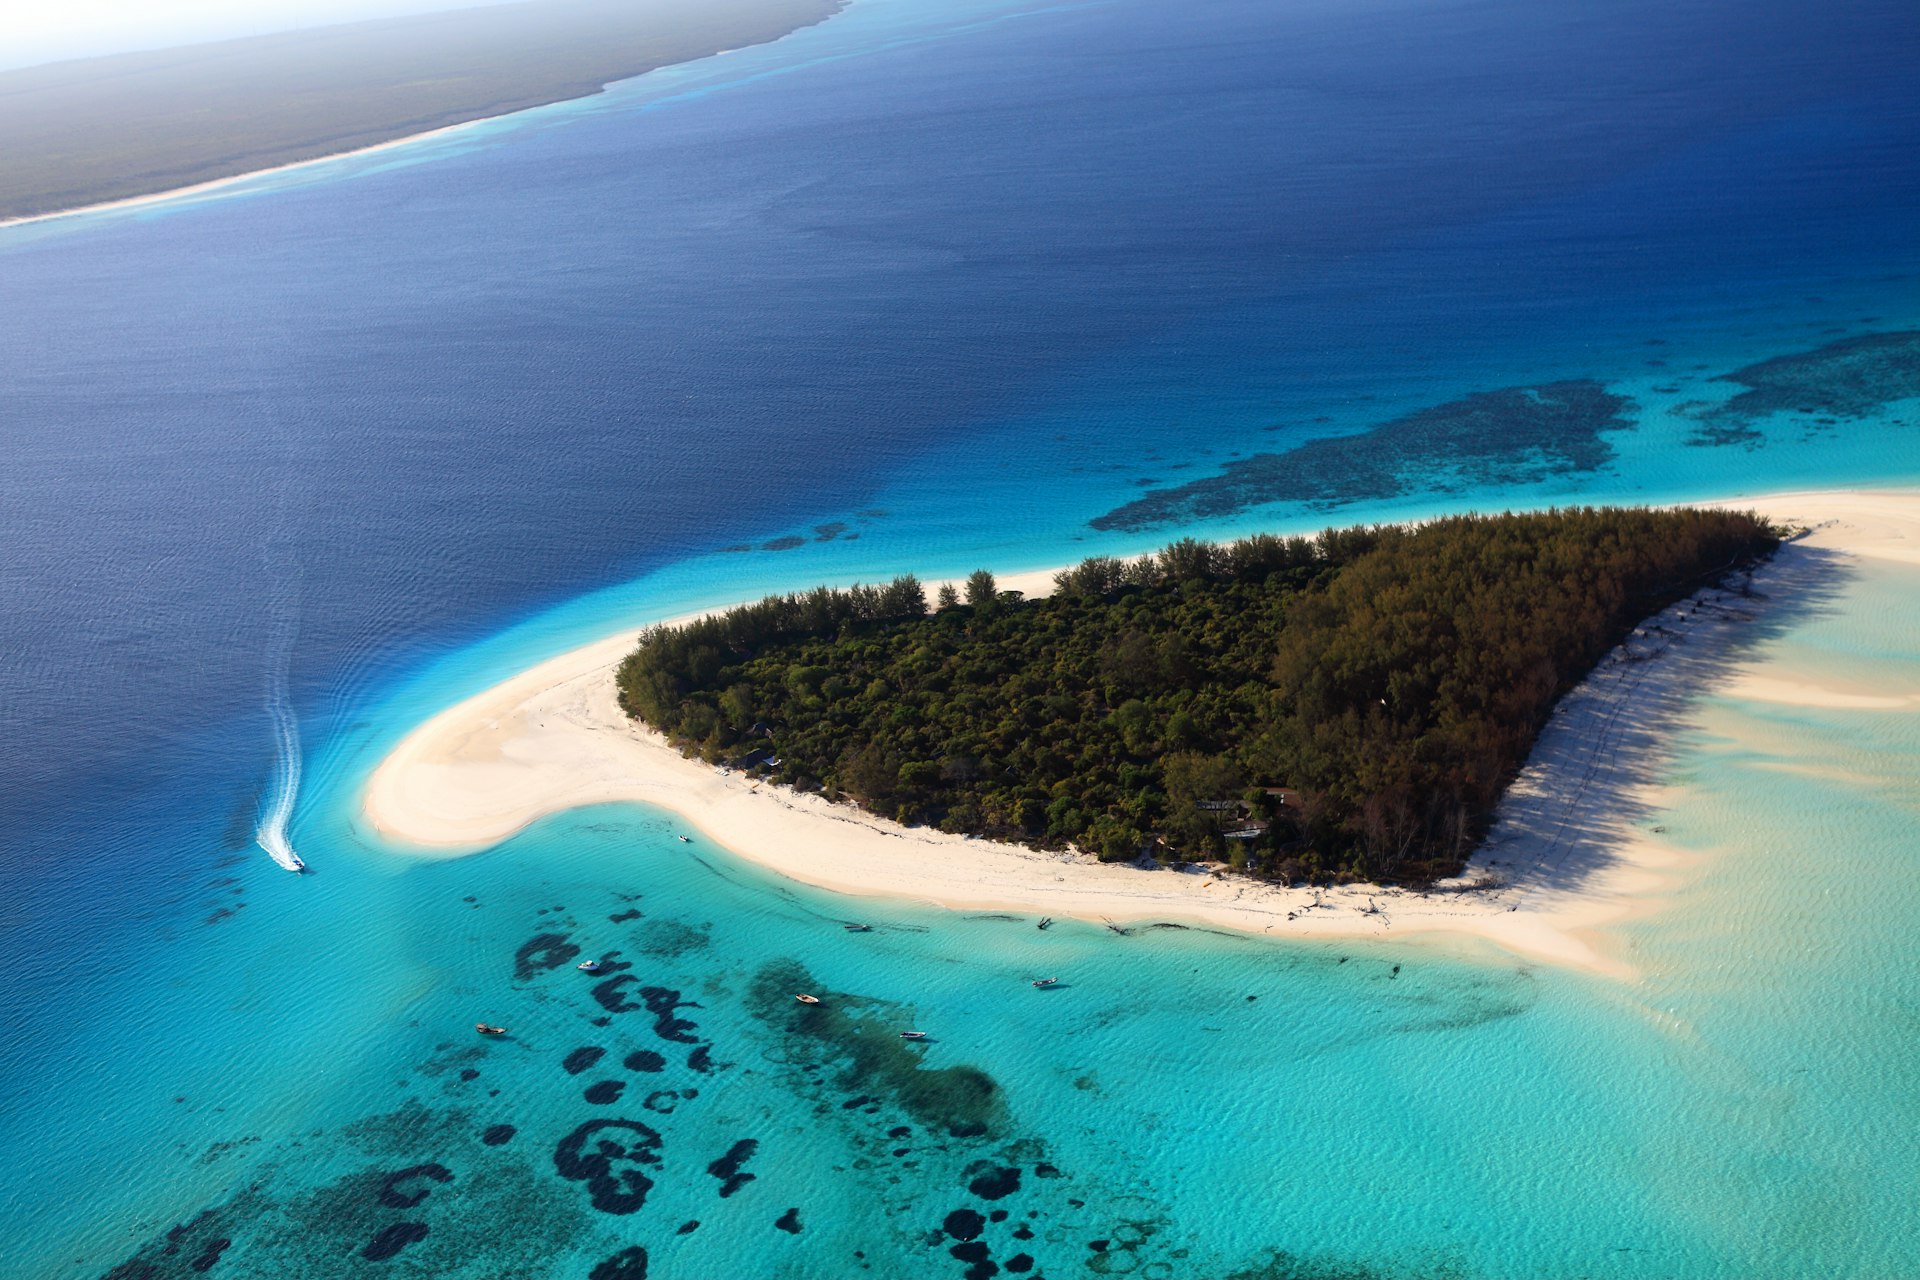 Aerial shot of andBeyond Mnemba Island's fin-shaped coastline